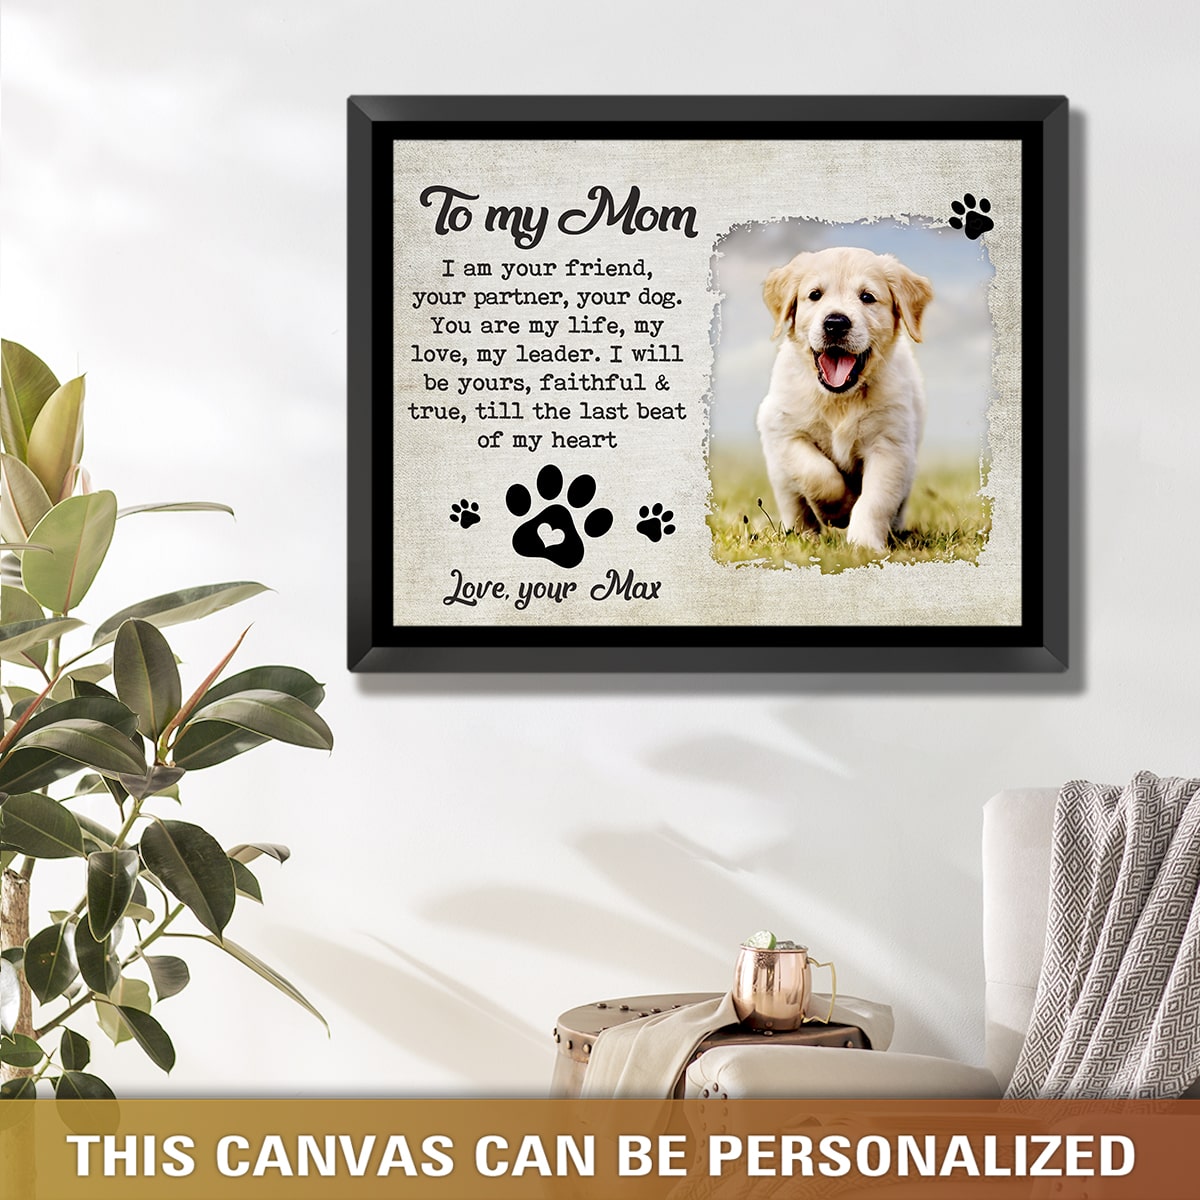 https://images.ohcanvas.com/ohcanvas_com/2022/03/10025214/happy-mothers-day-dog-mom-personalized-gift-for-dog-mom-i-am-your-friend-your-partner01.jpg